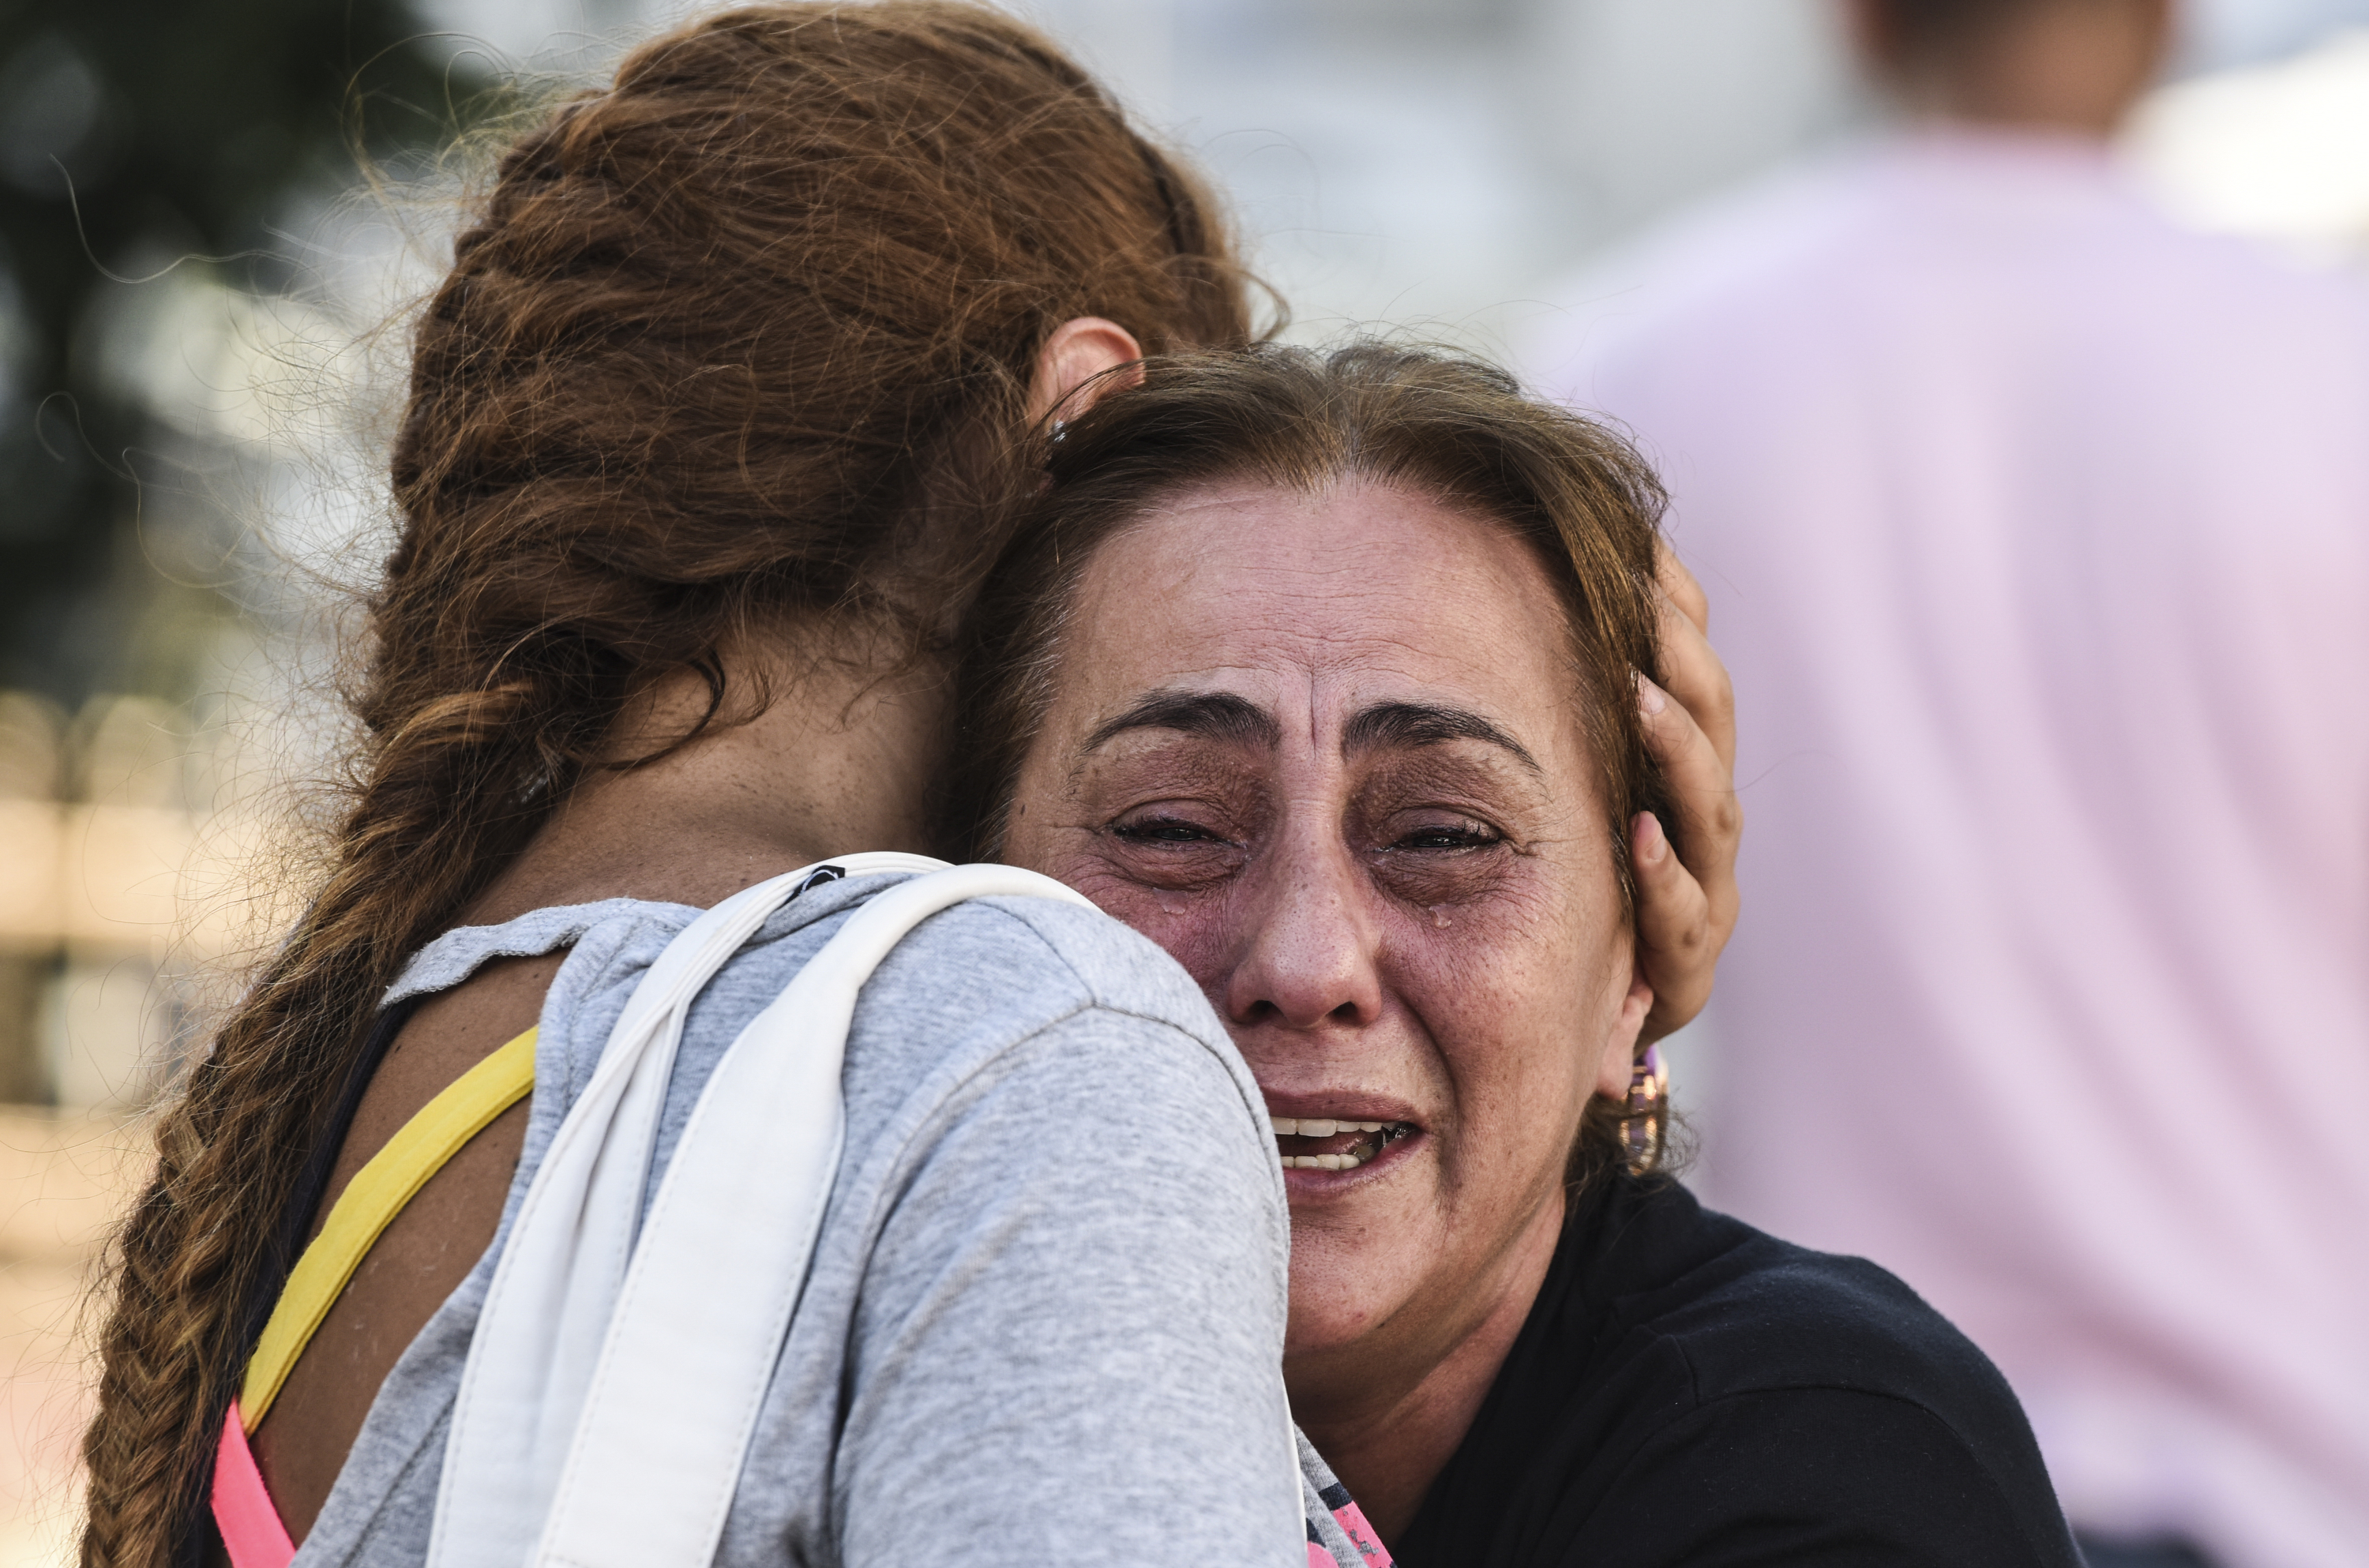 A mother of victims reacts outside a forensic medicine building close to Istanbul's airport on June 29, 2016, a day after a suicide bombing and gun attack targetted Istanbul's airport, killing at least 36 people. A triple suicide bombing and gun attack that occurred on June 28, 2016 at Istanbul's Ataturk airport has killed at least 36 people, including foreigners, with Turkey's prime minister saying early signs pointed to an assault by the Islamic State group. / AFP PHOTO / BULENT KILIC